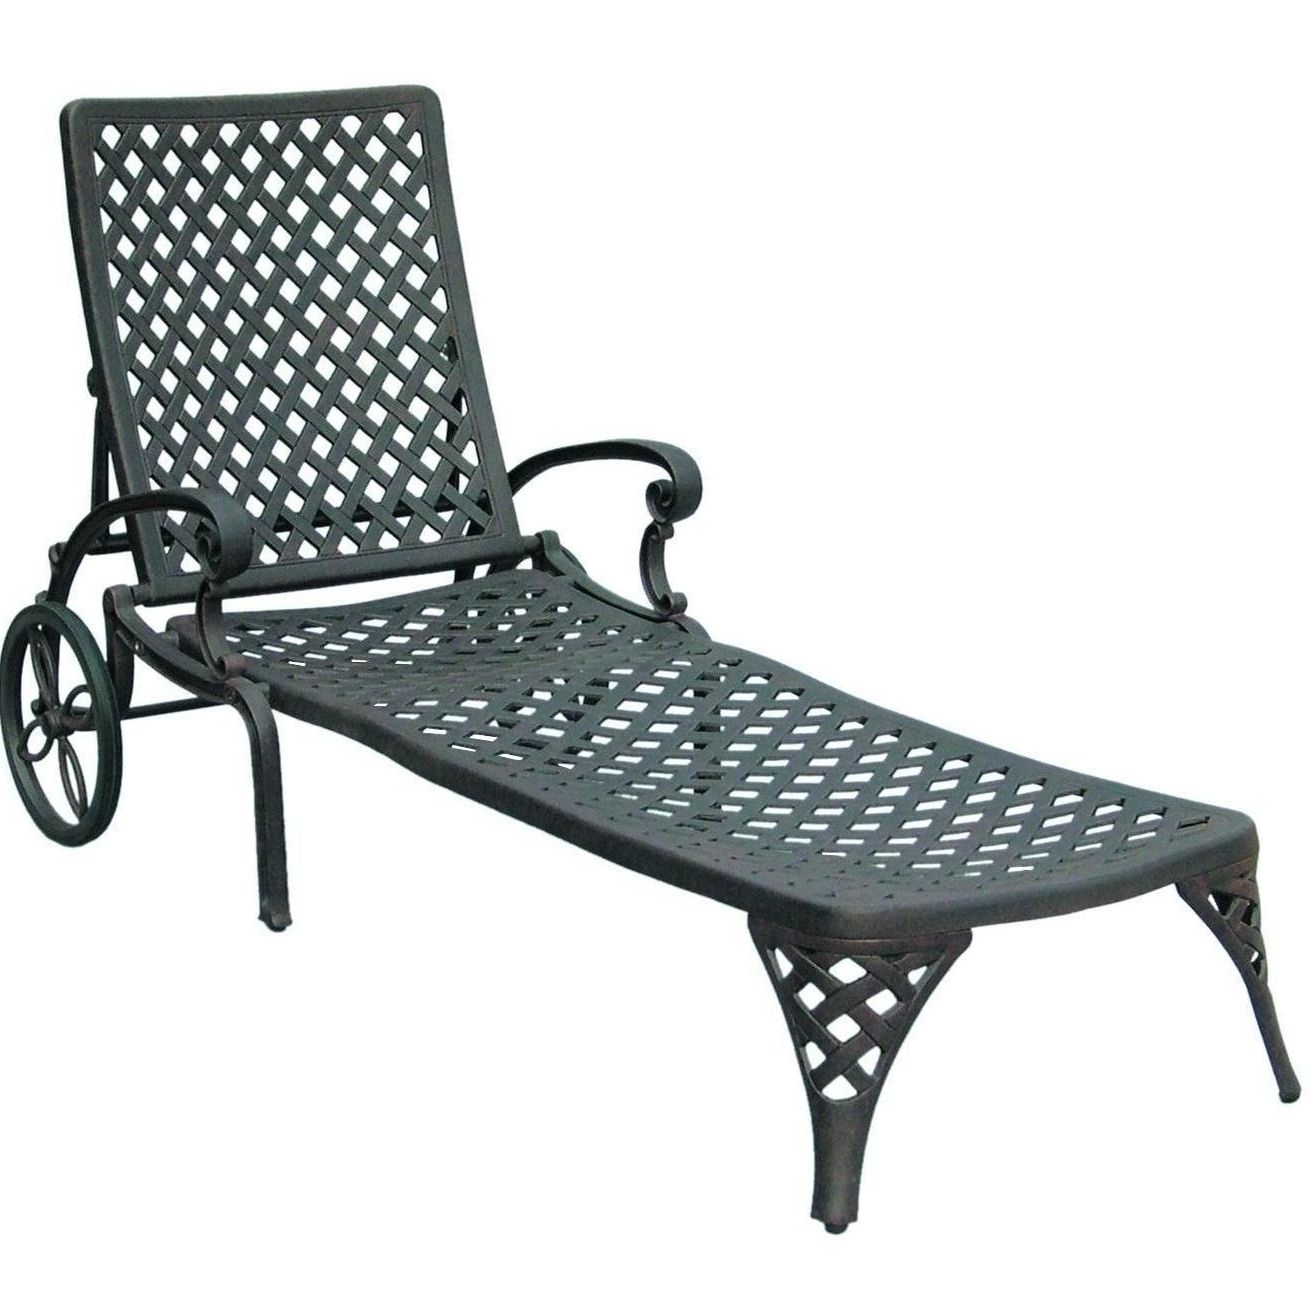 The 15 Best Collection of Outdoor Cast Aluminum Chaise Lounge Chairs